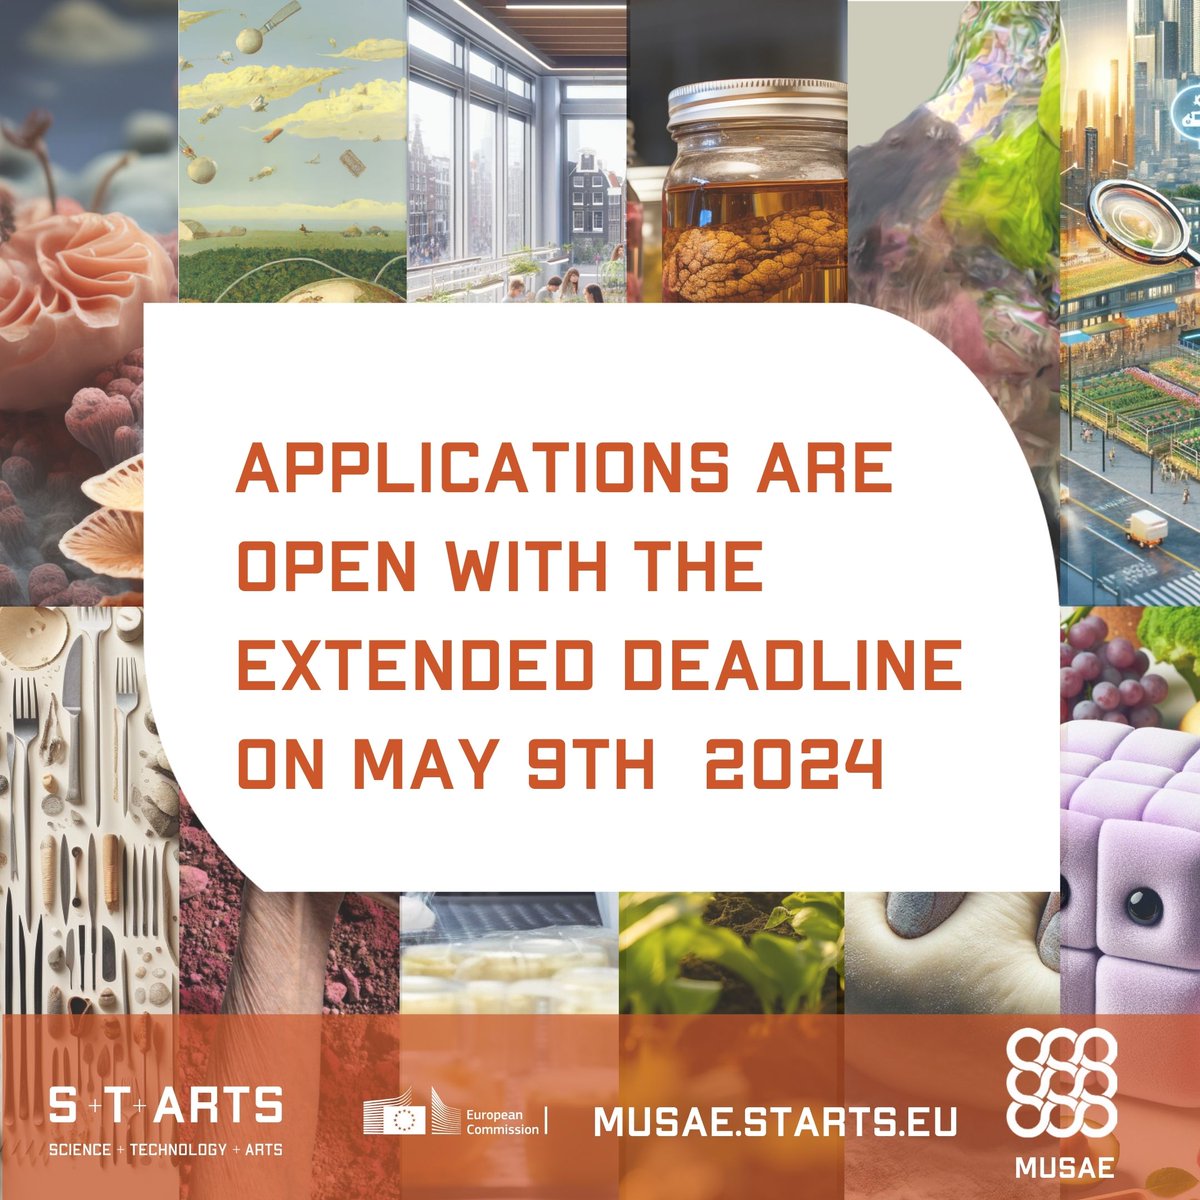 📢Final call for the 2nd Expert Open Call with the Extended Deadline on May 9, 2024 Great opportunity to participate in the evaluation process of the MUSAE 2nd Open call that will chose 11 SMEs and artists to develop prototypes for 'Food for Medicine' 👉 musae.starts.eu/musae/calls-2n…